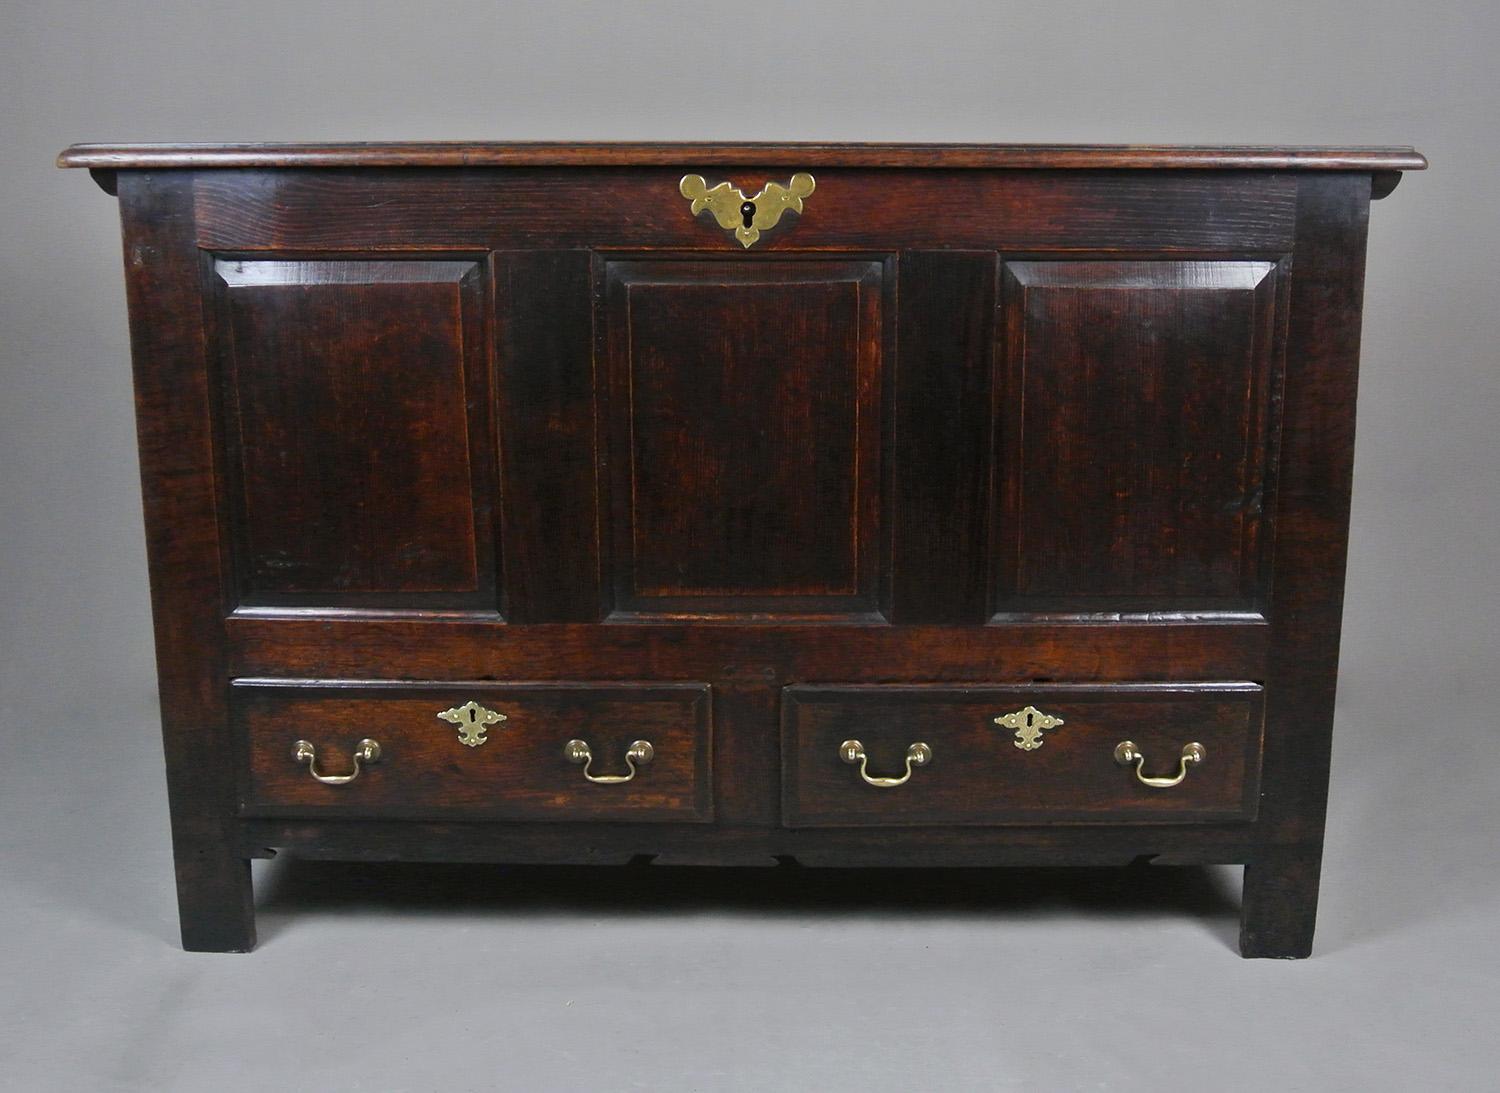 A really good mid 18th century oak mule chest of lovely proportions and with a fantastic well developed natural and rich colour. The drawers with original handles and the chest with its original escutcheon, the engraved pattern worn from regular